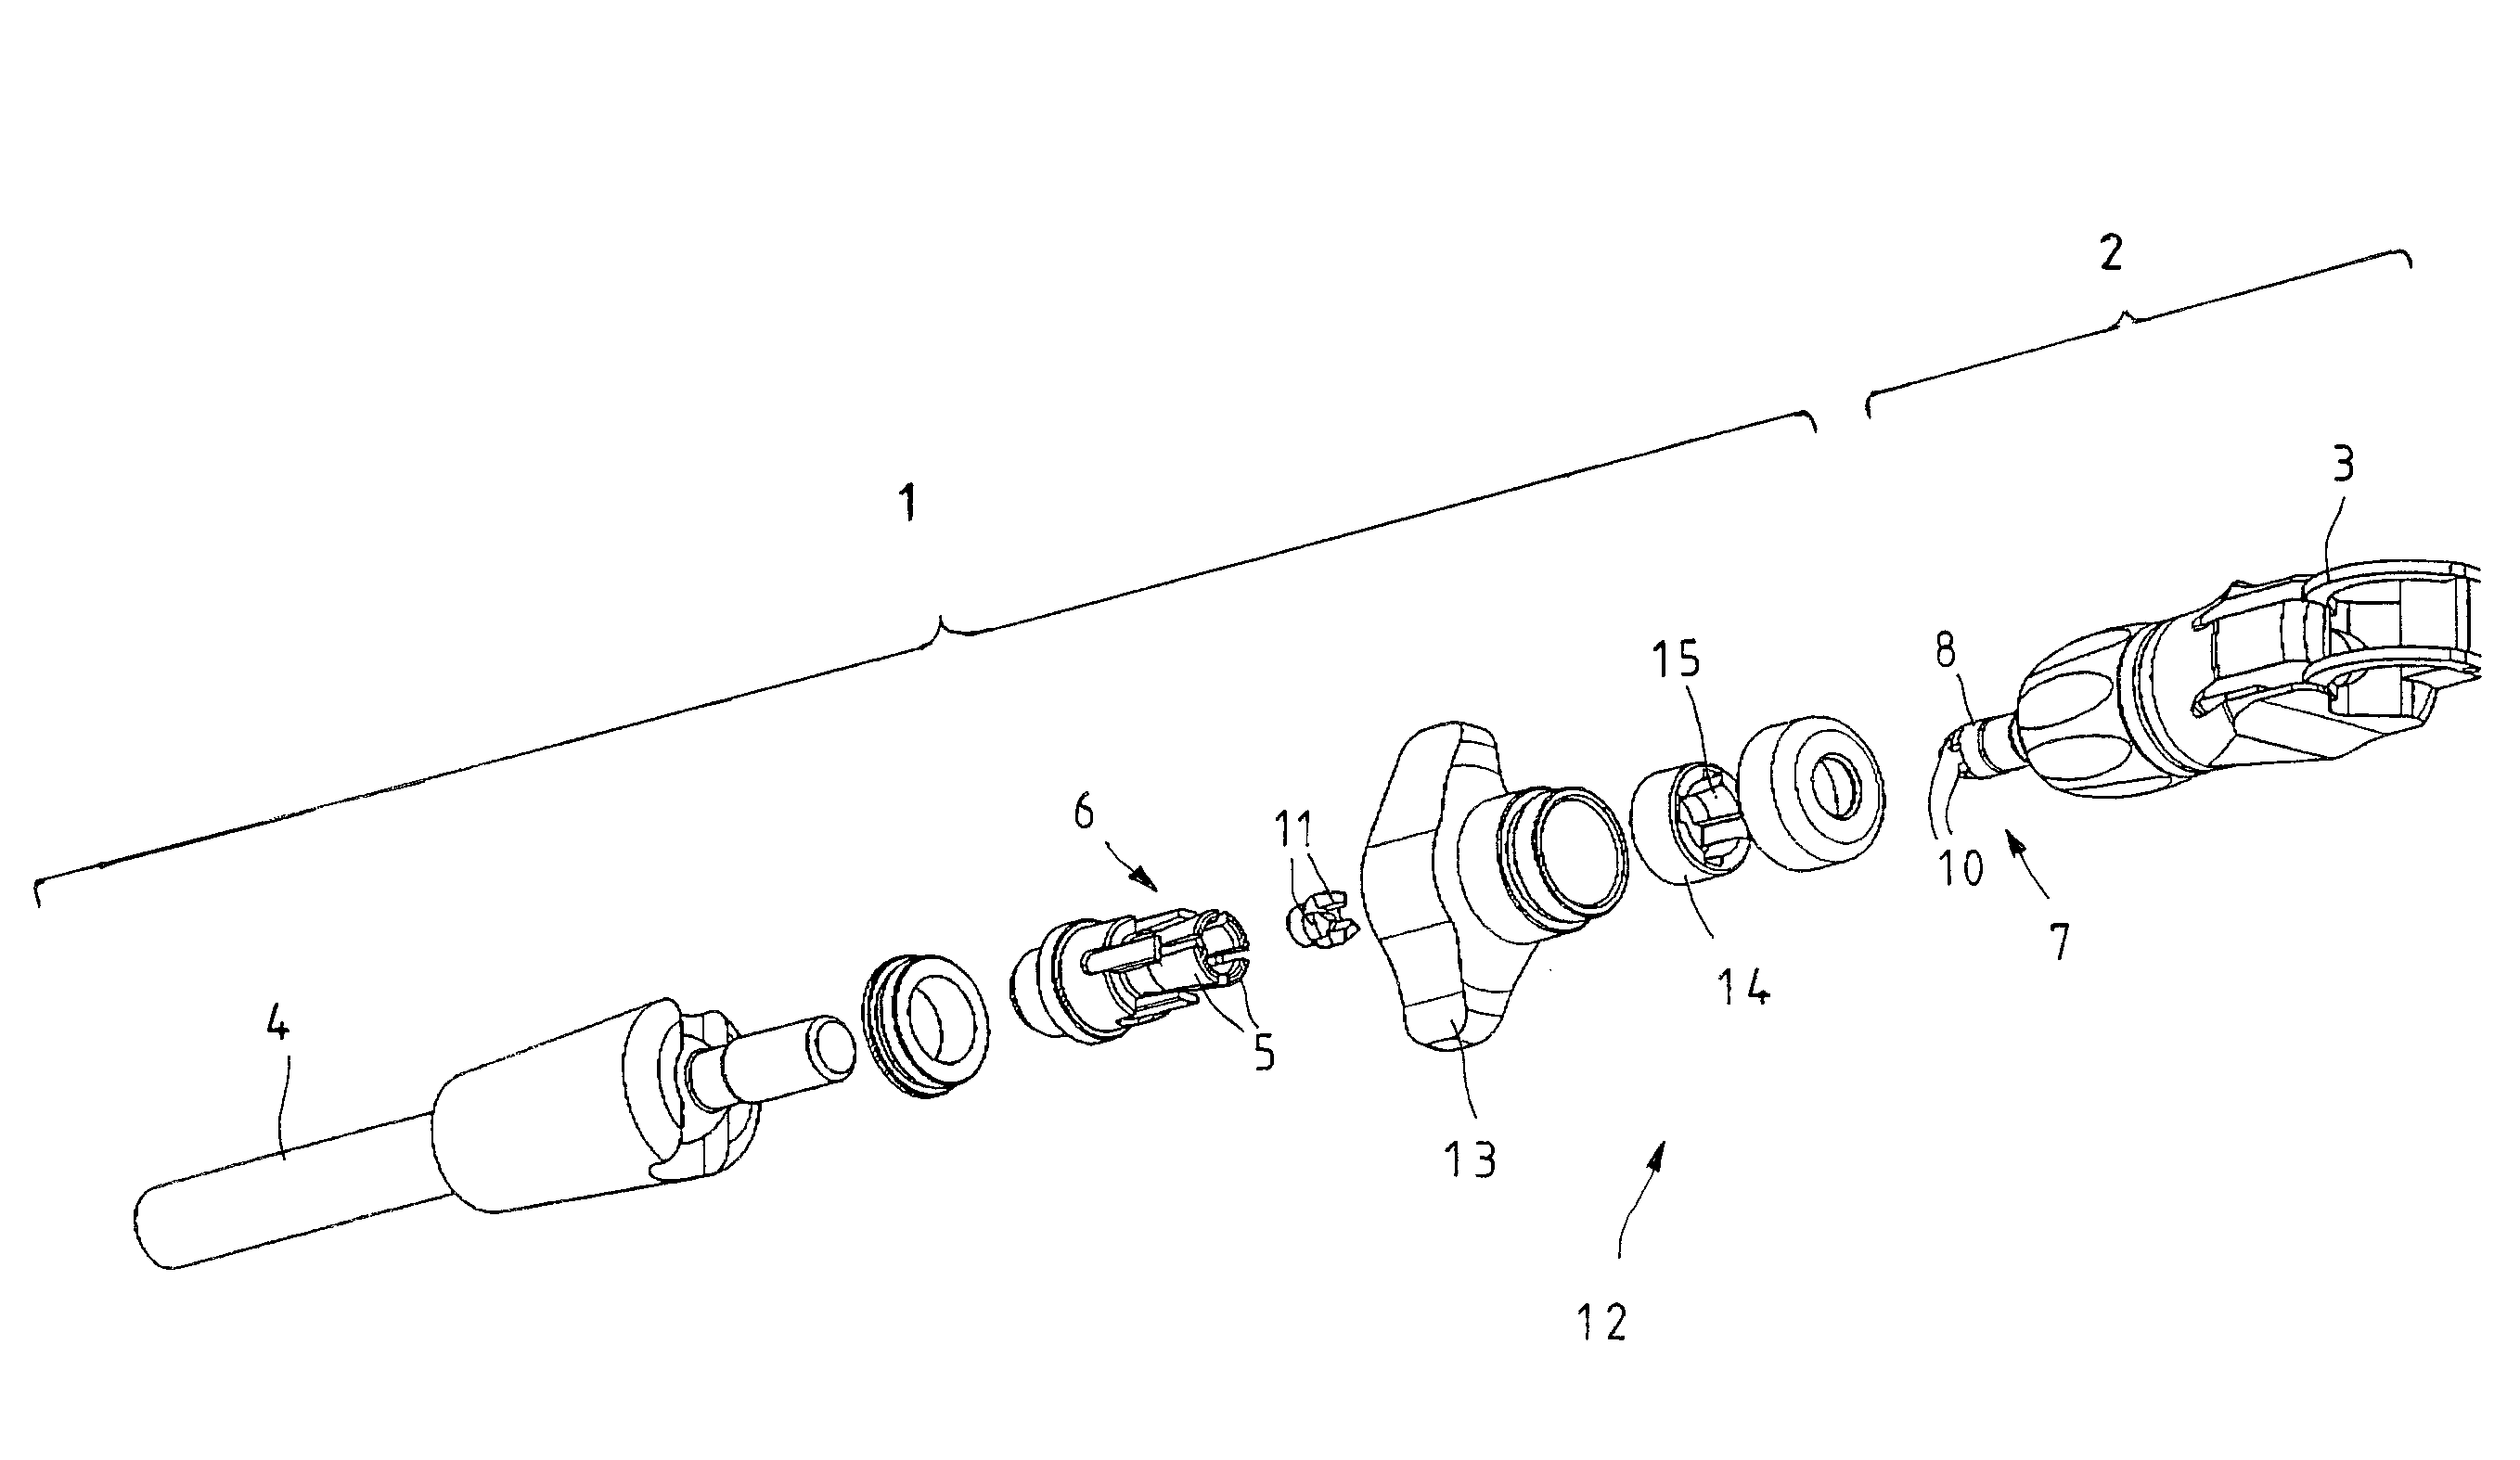 Coupling device for attaching medical instruments to a holding device